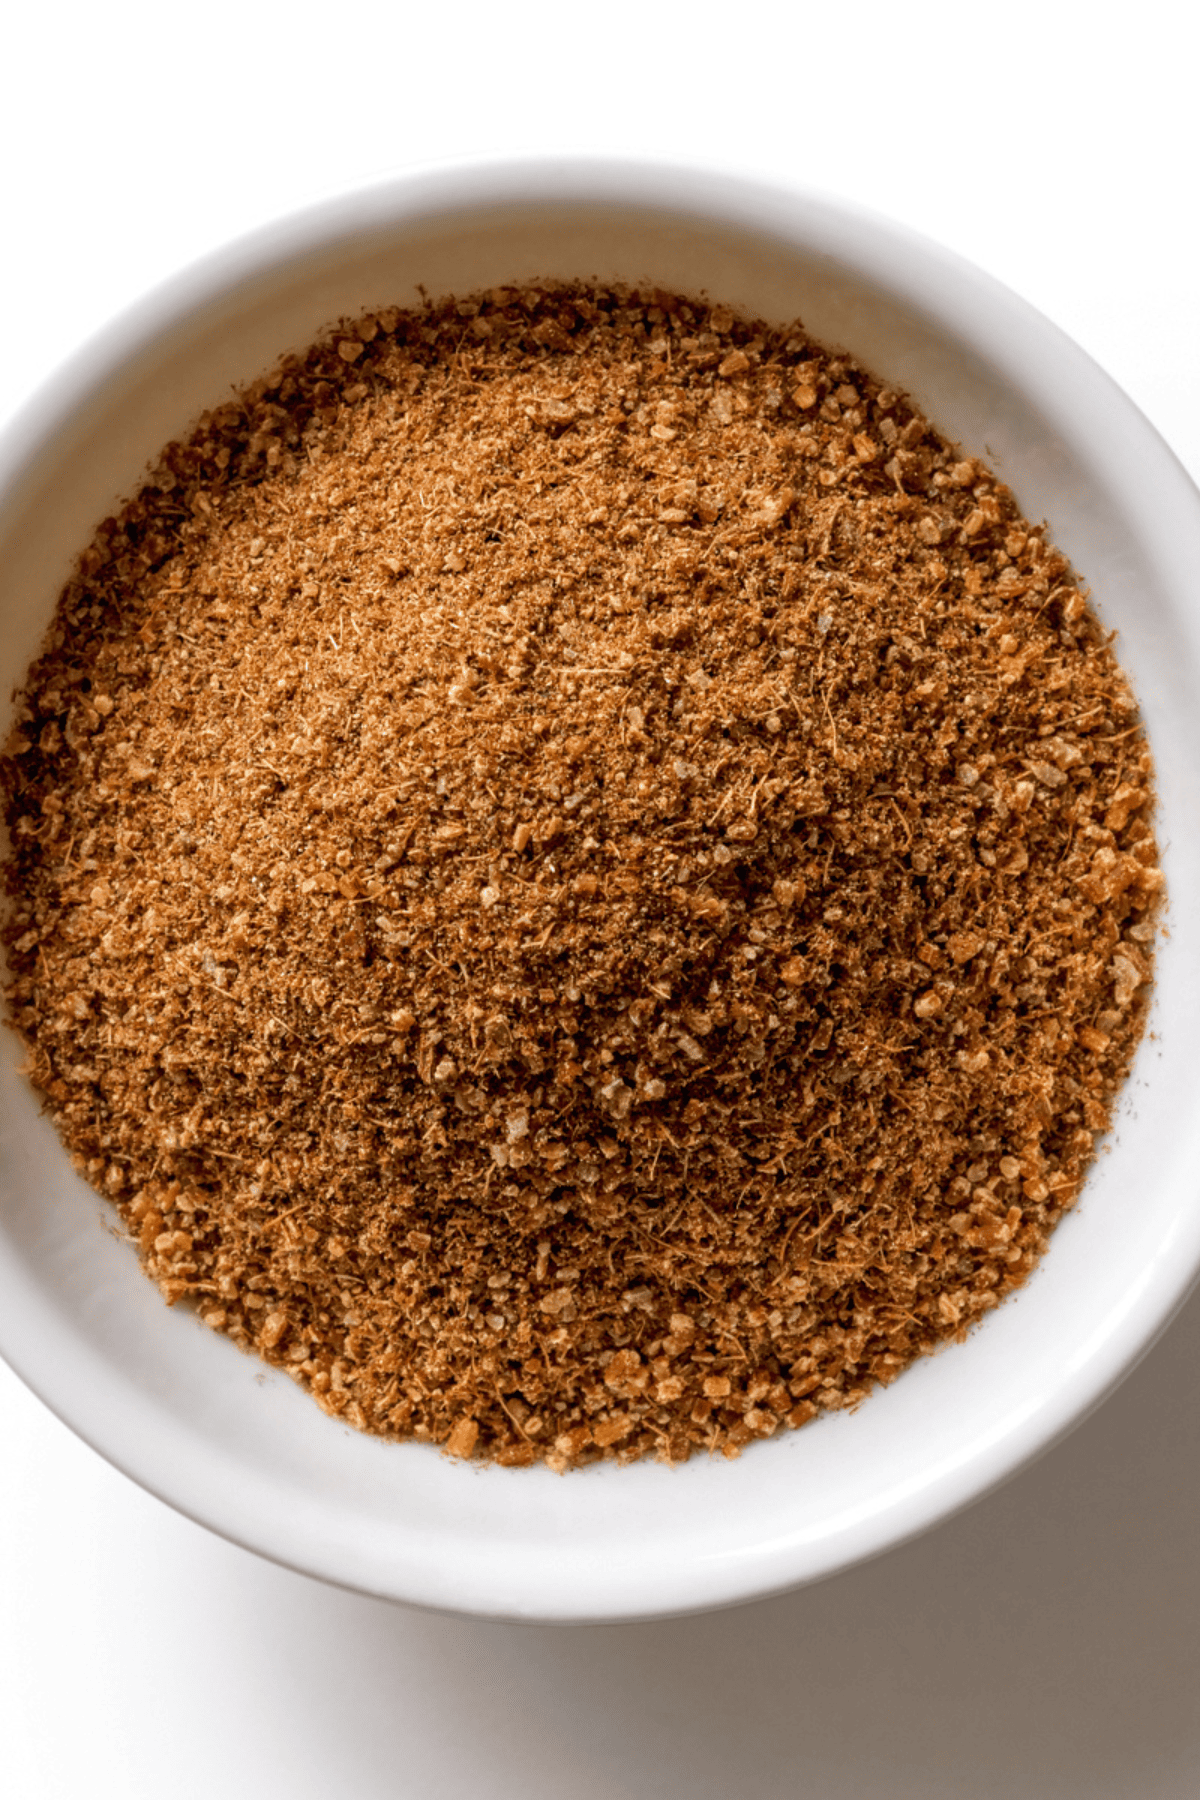 Overhead image of ground cumin in a white bowl.